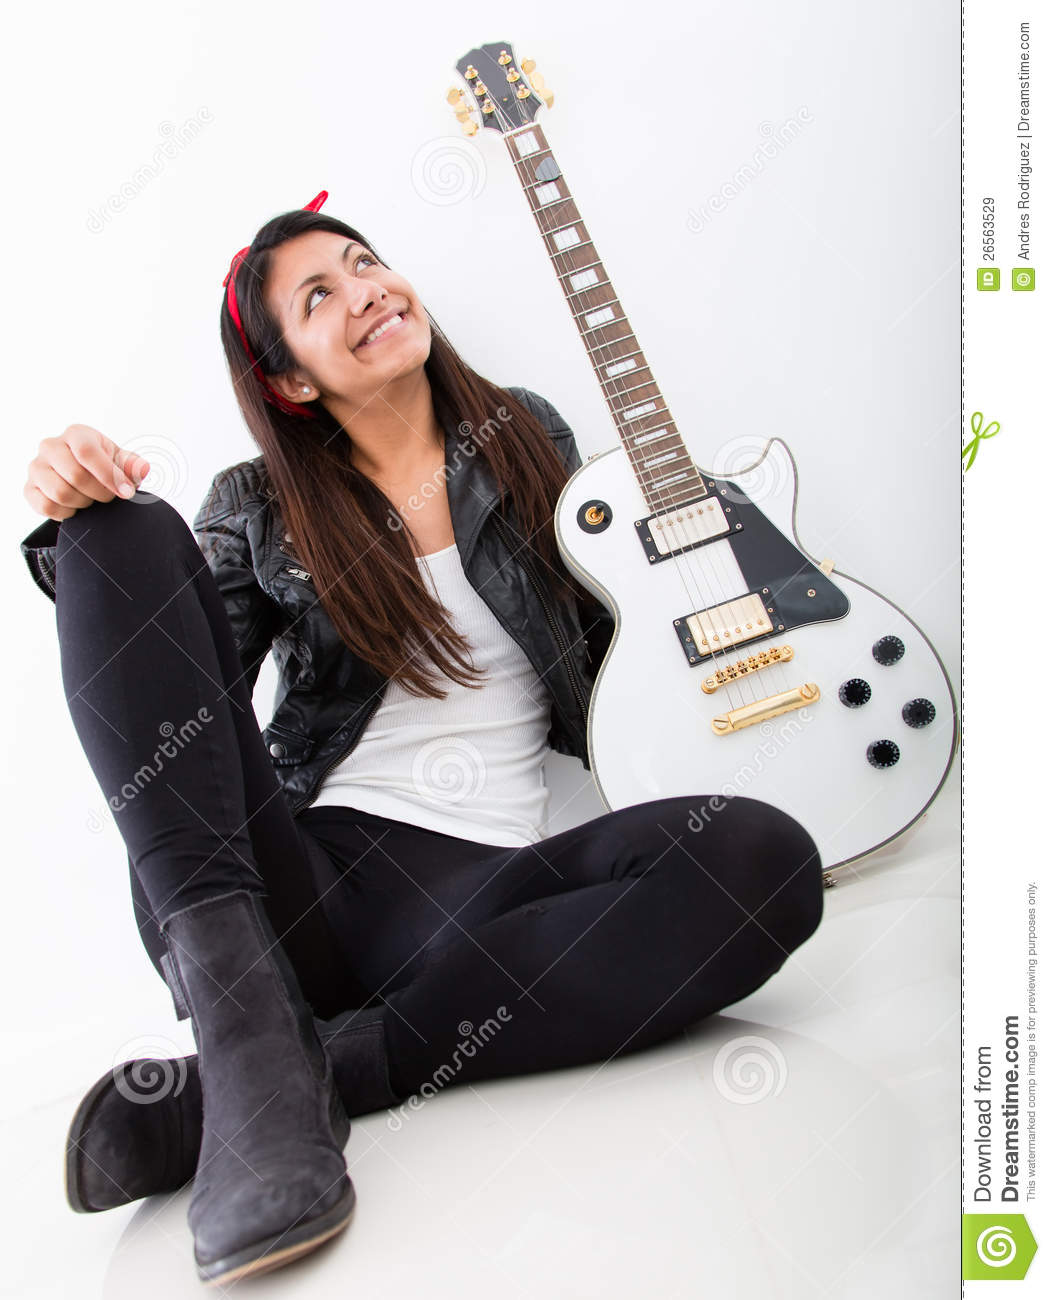 Woman Thinking Of Being A Rock Star Royalty Free Stock Images   Image